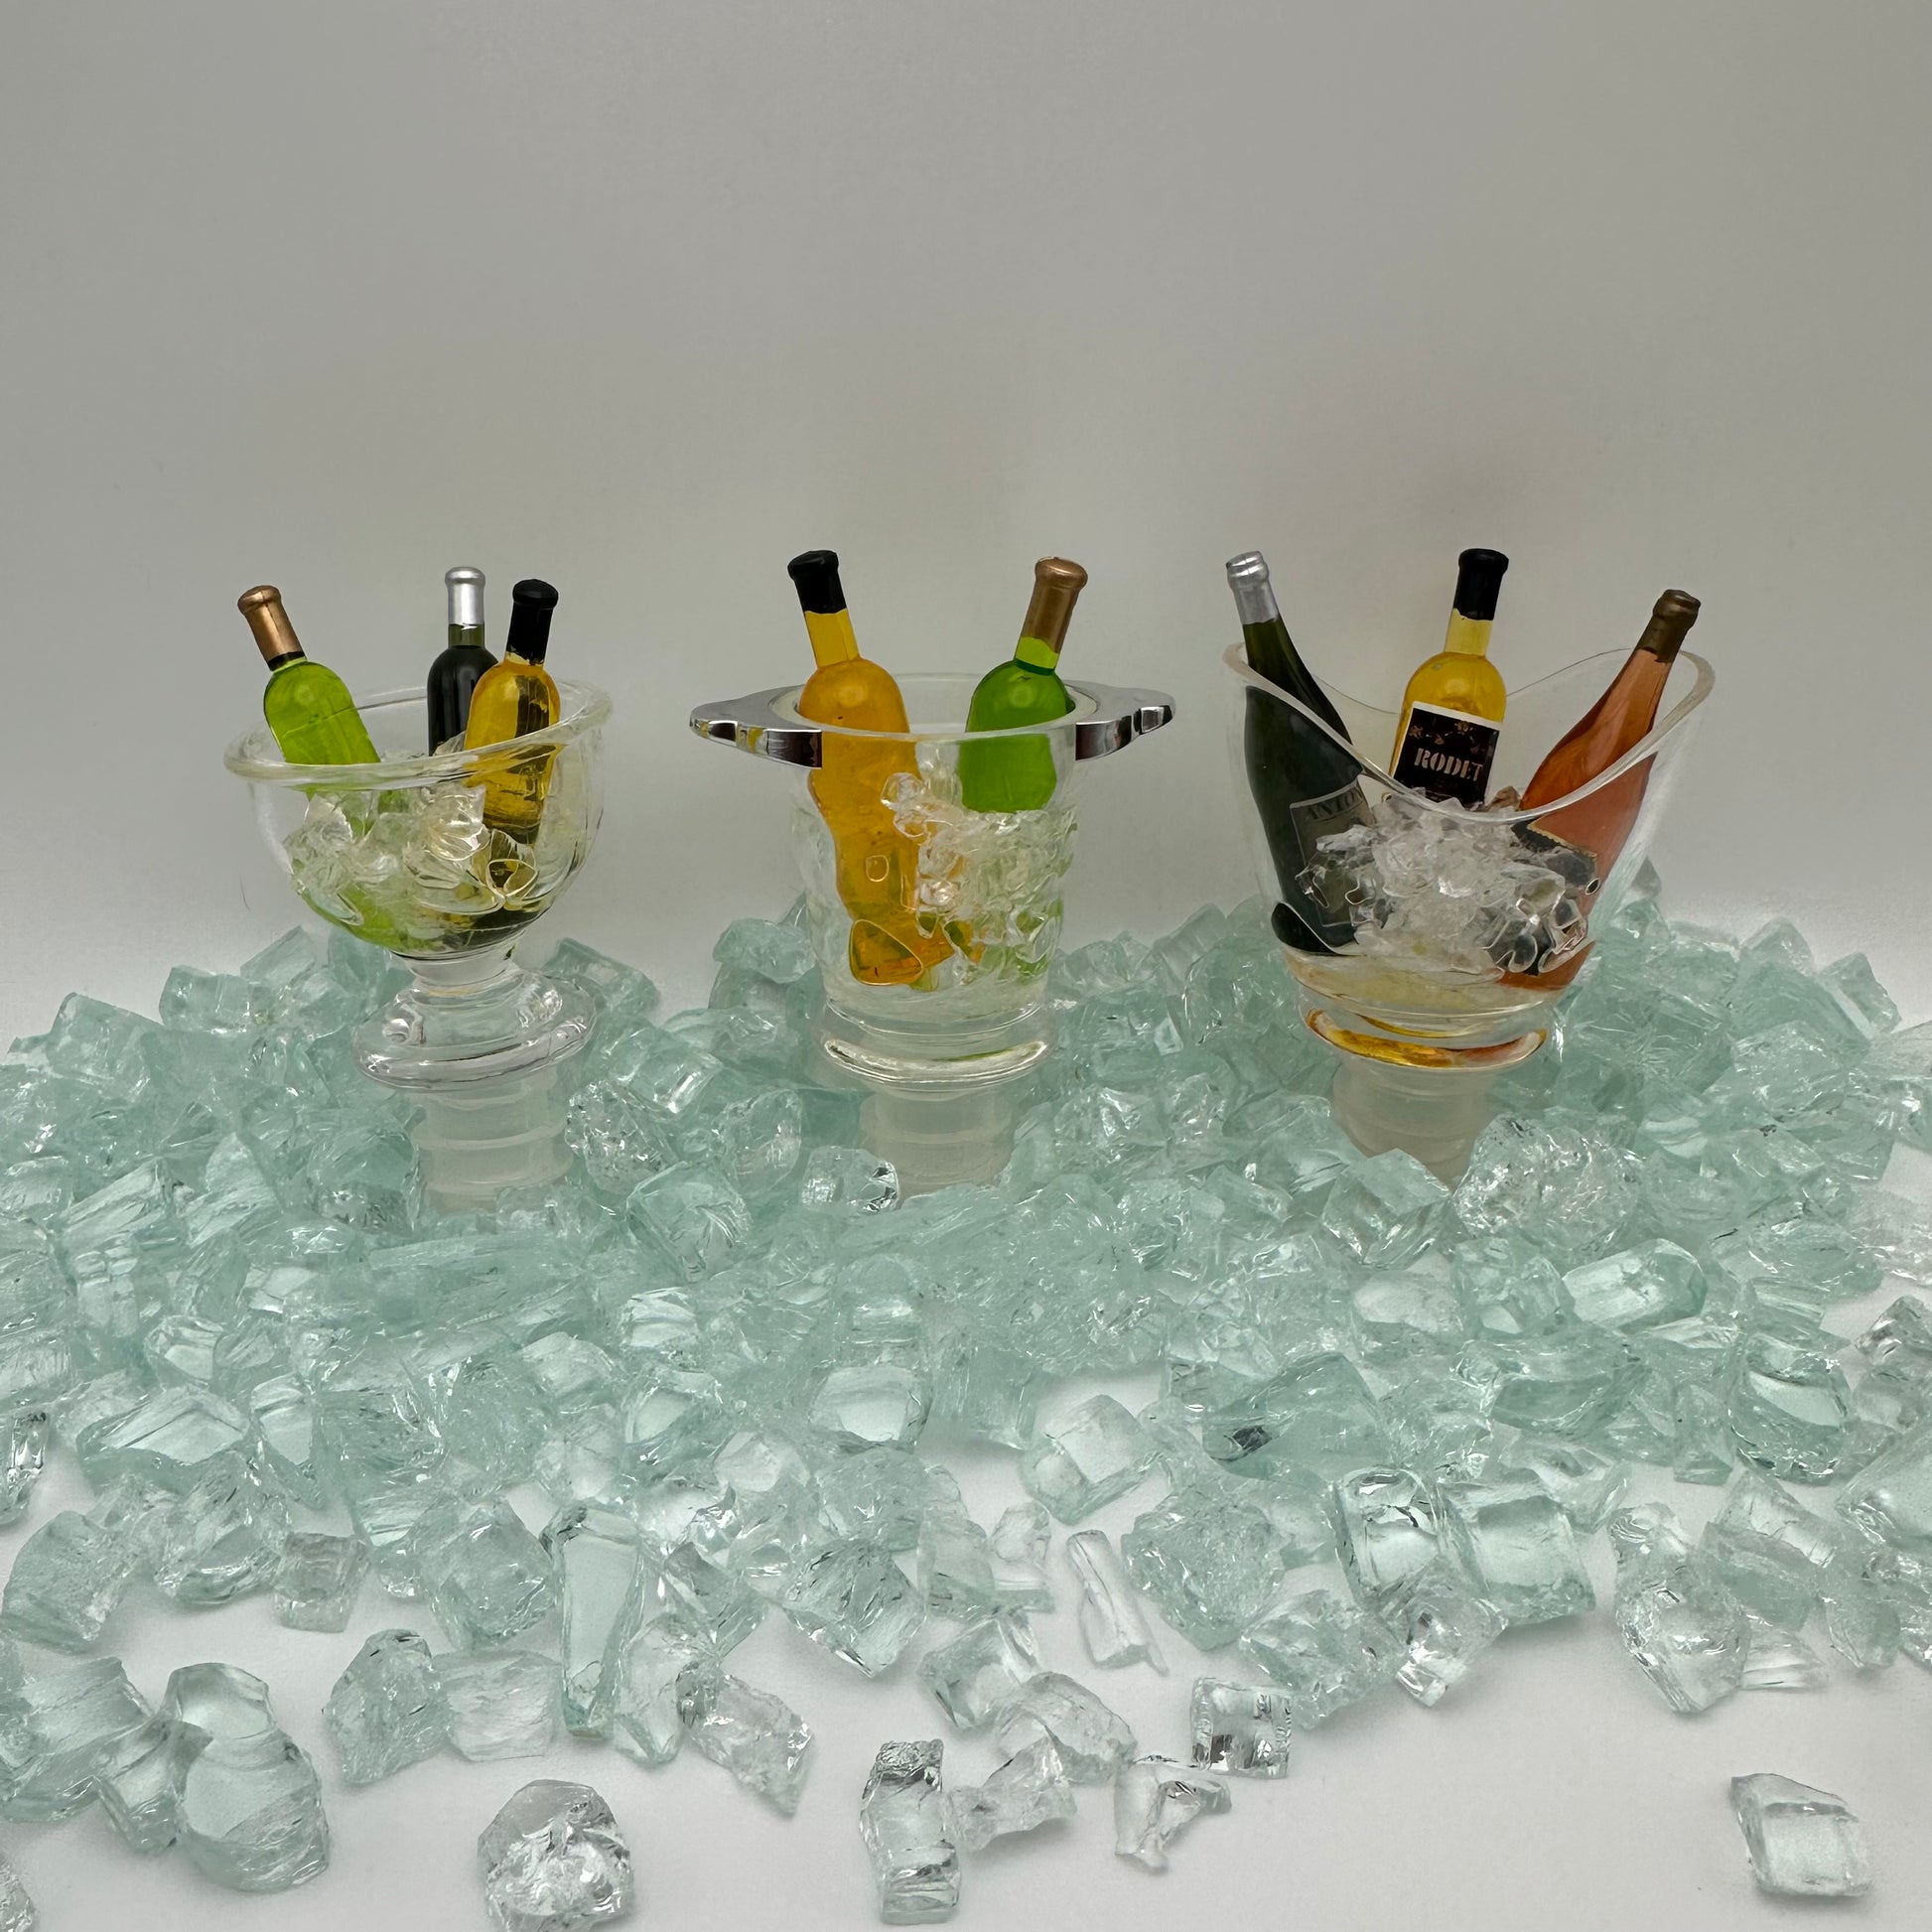 3 Bottle stoppers designed with various acrylic wine bowl shapes filled with mini fake ice and 3 wine bottles in it. 